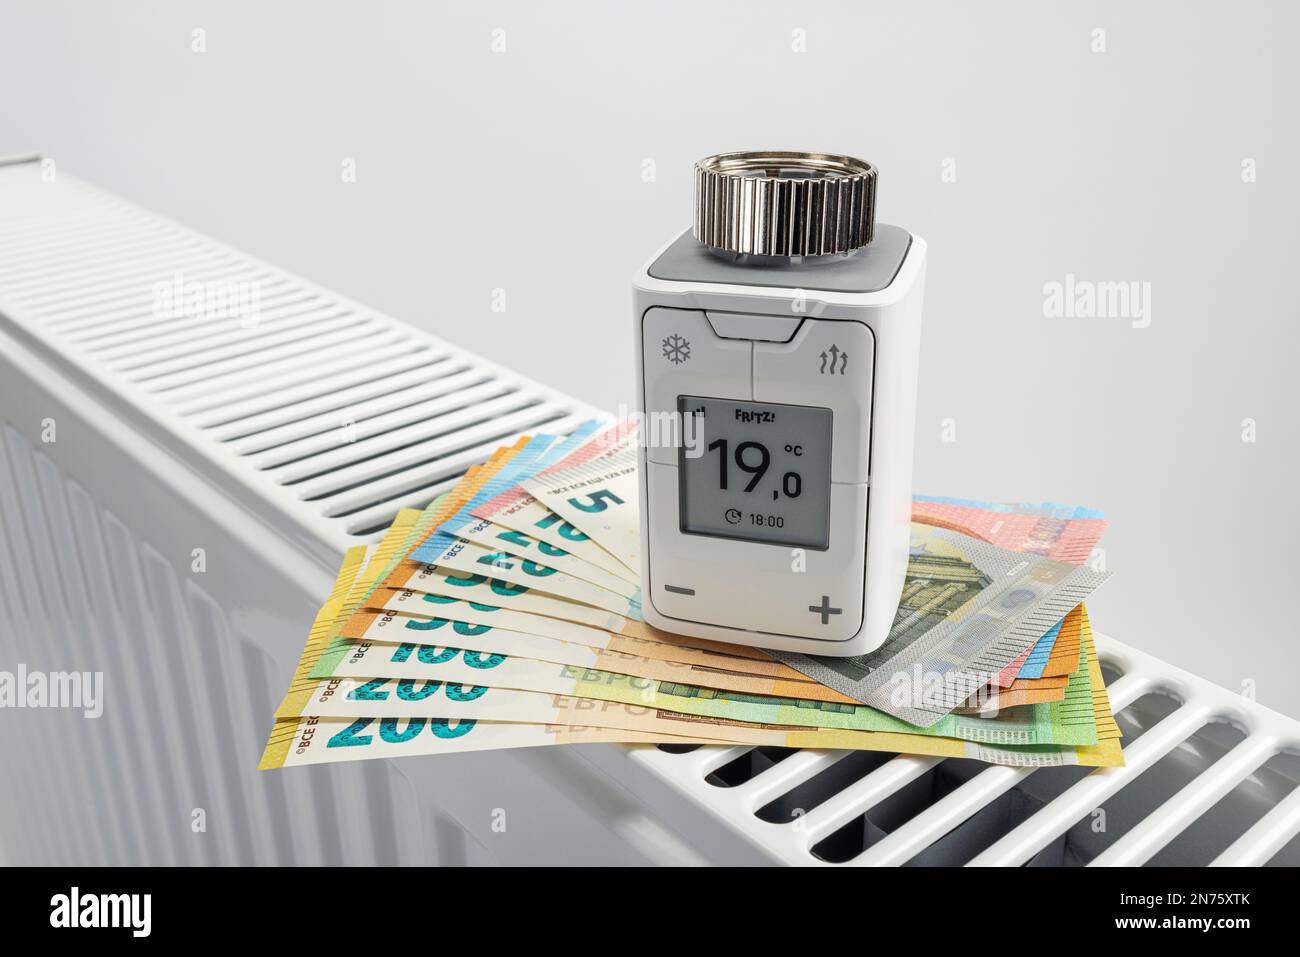 WLAN radiator thermostat FRITZ! DECT 302, euro bills on radiator, white background, icon image, replace heating thermostat, save energy costs, Stock Photo